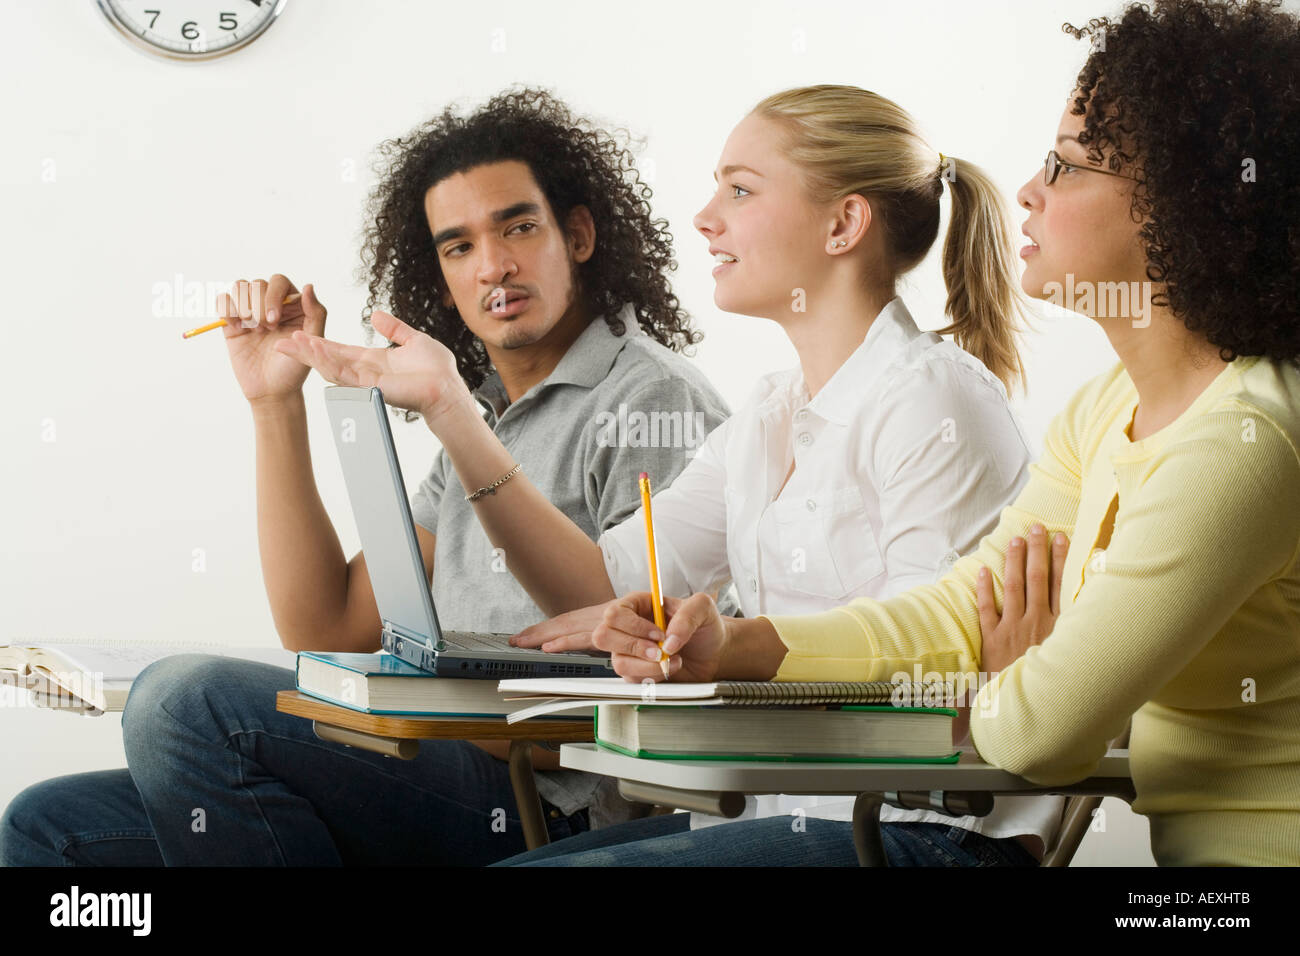 Three college students in class Stock Photo